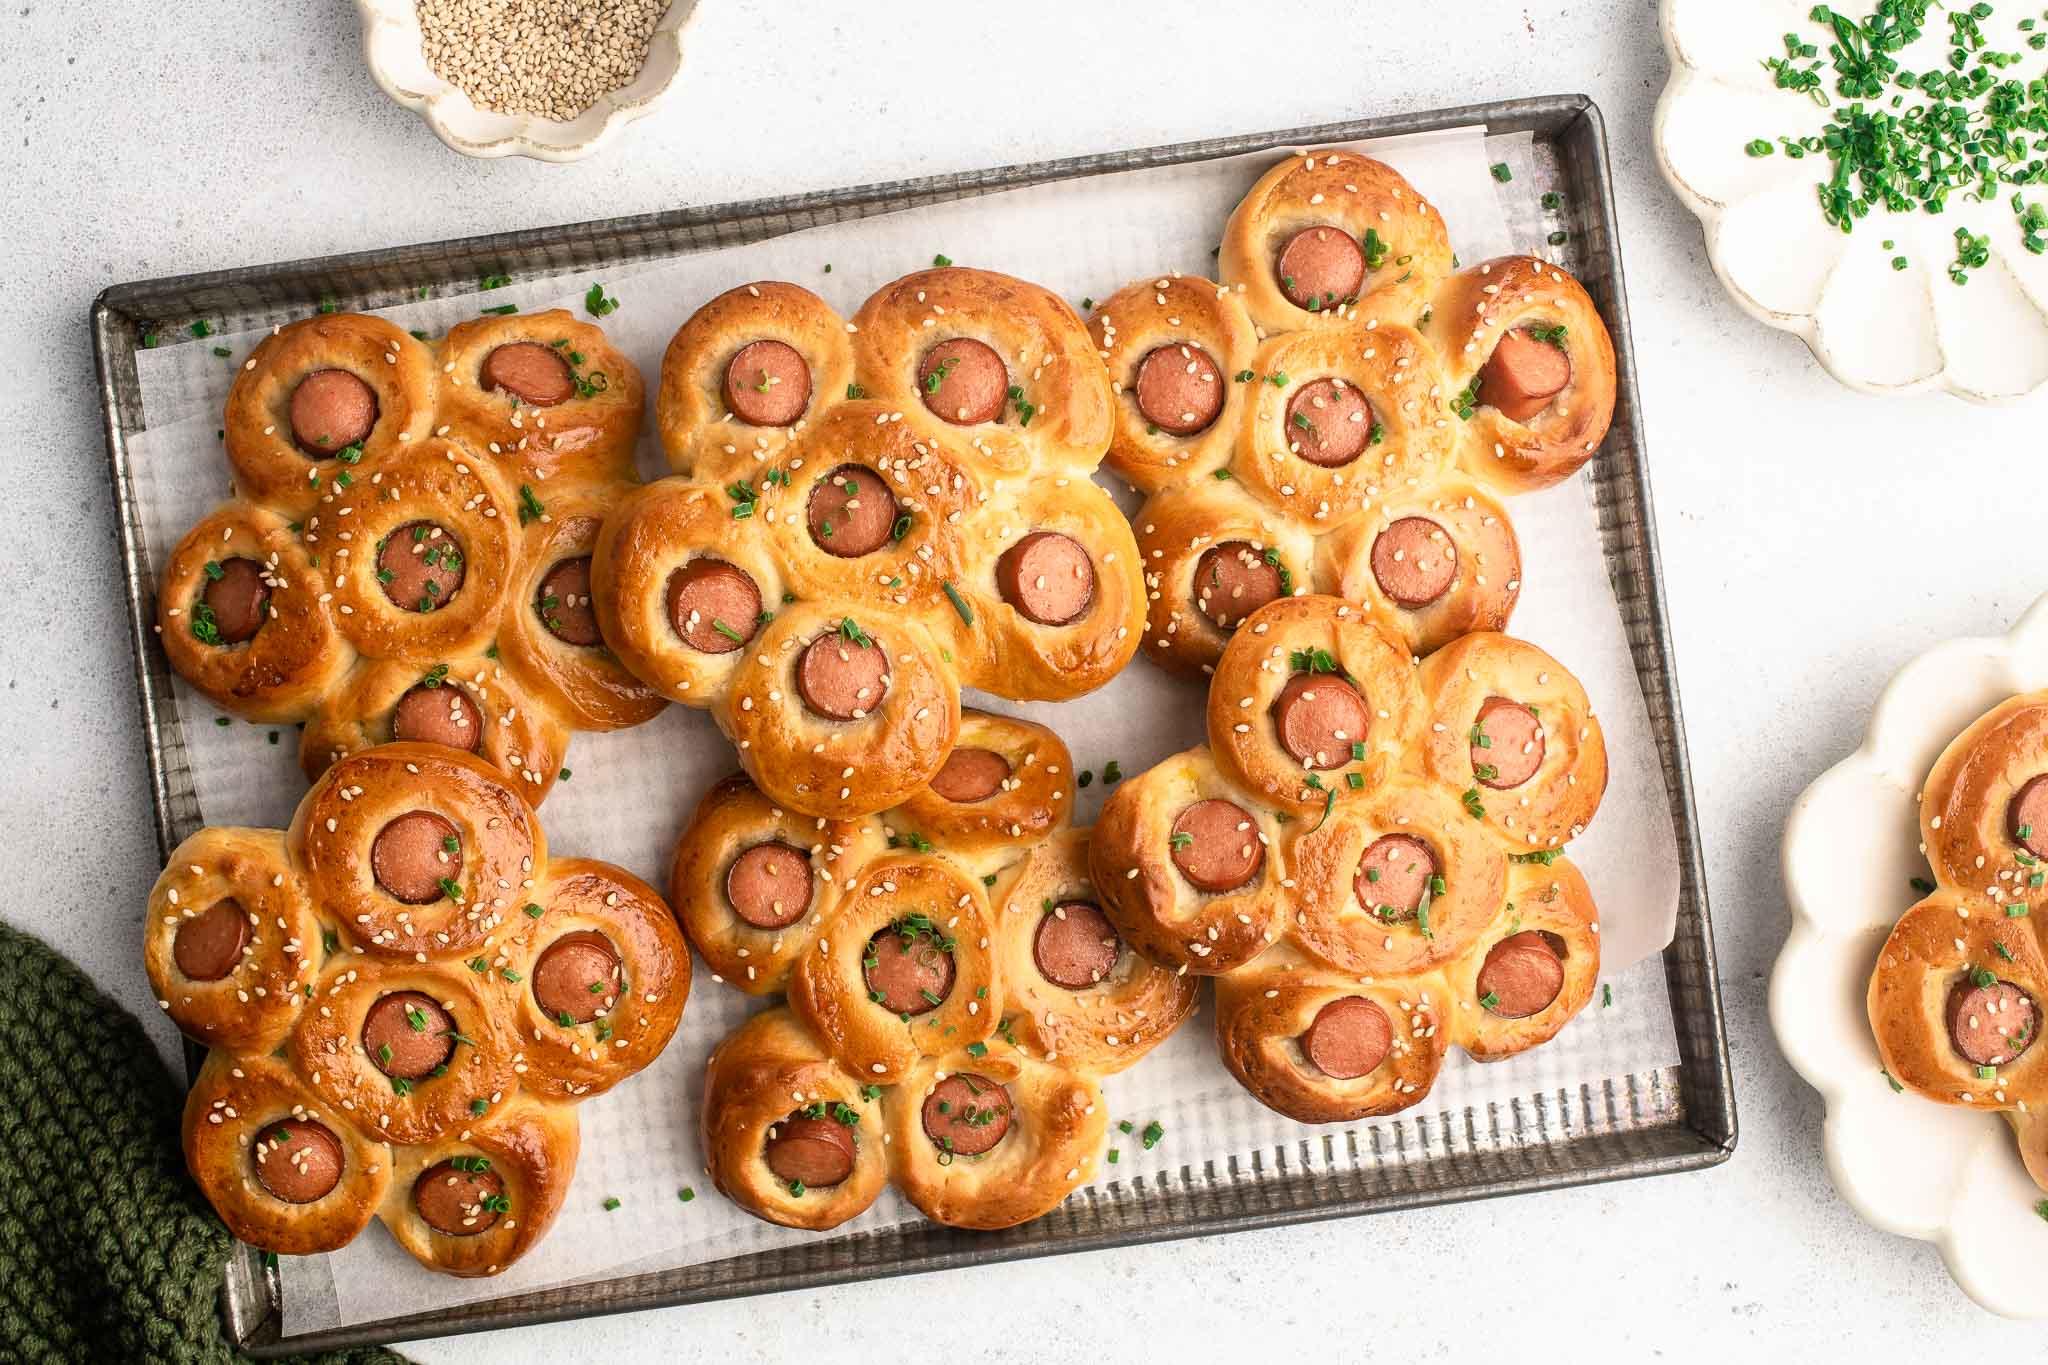 hot dog flower buns on lined baked tray with garnish